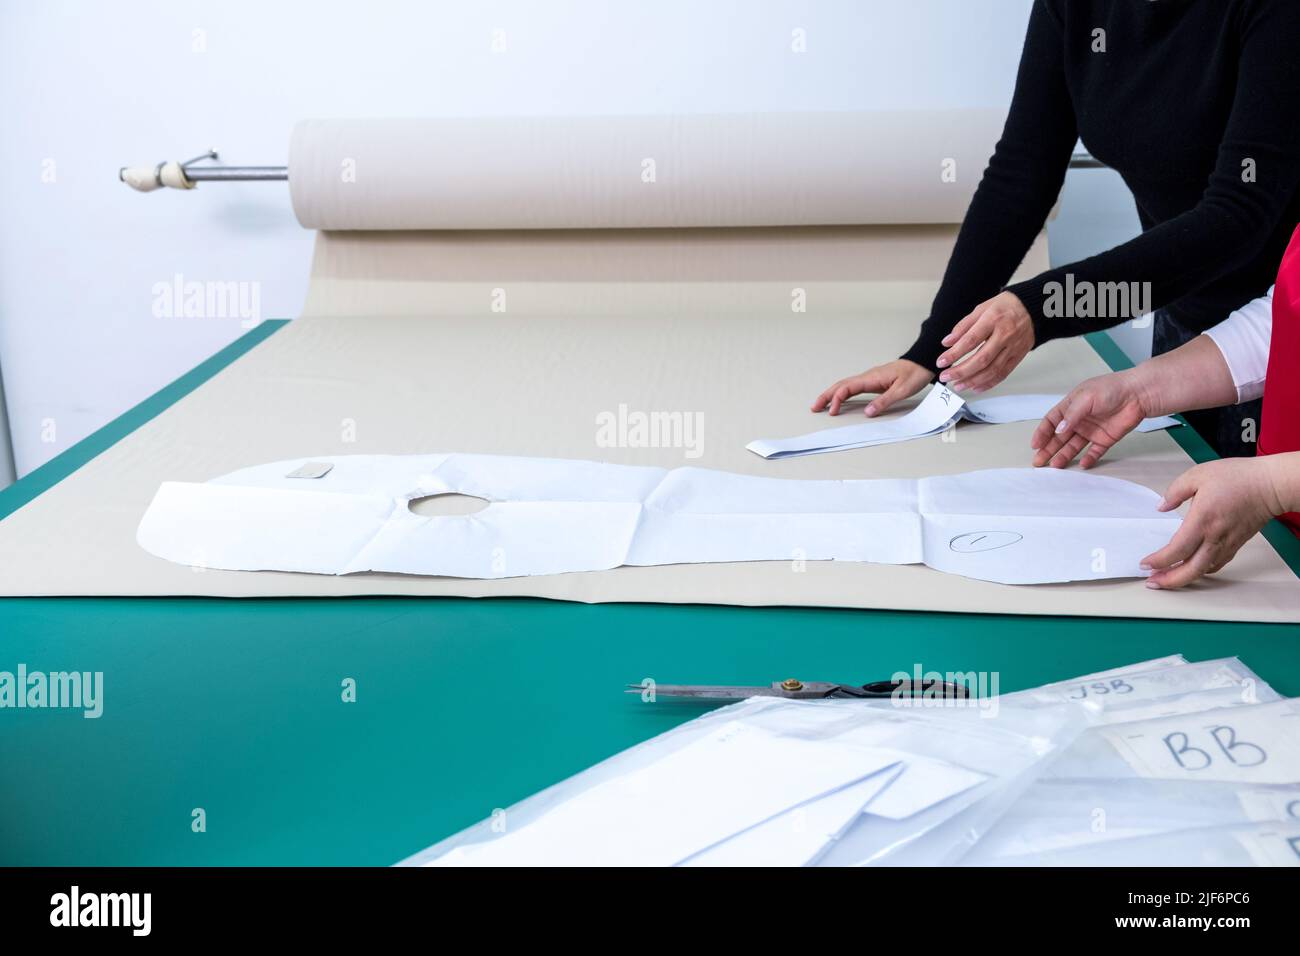 Crop anonymous dressmakers arranging paper patterns on textile while working together at table in modern light atelier with special equipment Stock Photo